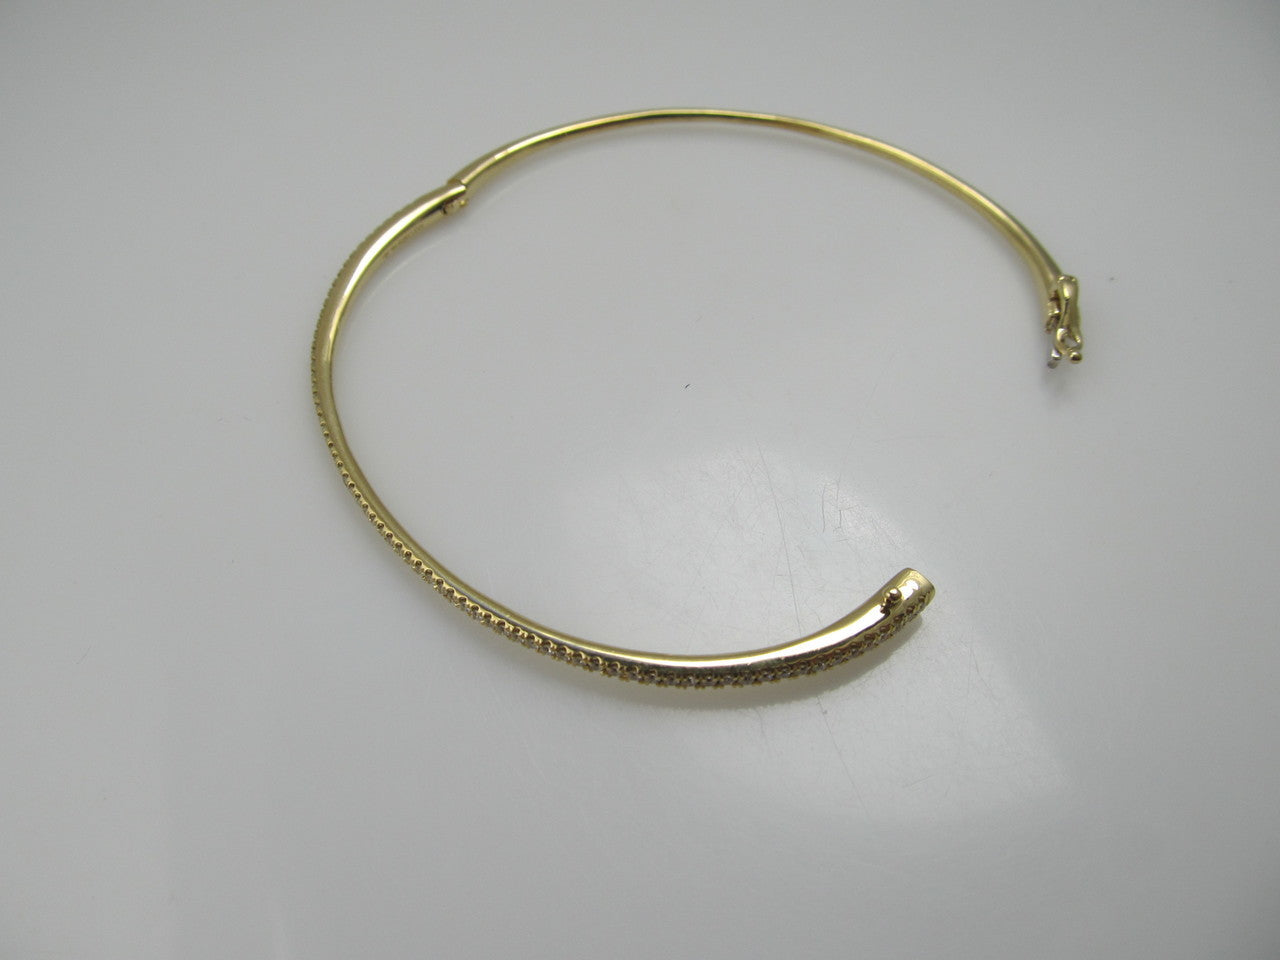 18k yellow gold bangle bracelet with .52cts in diamonds signed Bony Levy